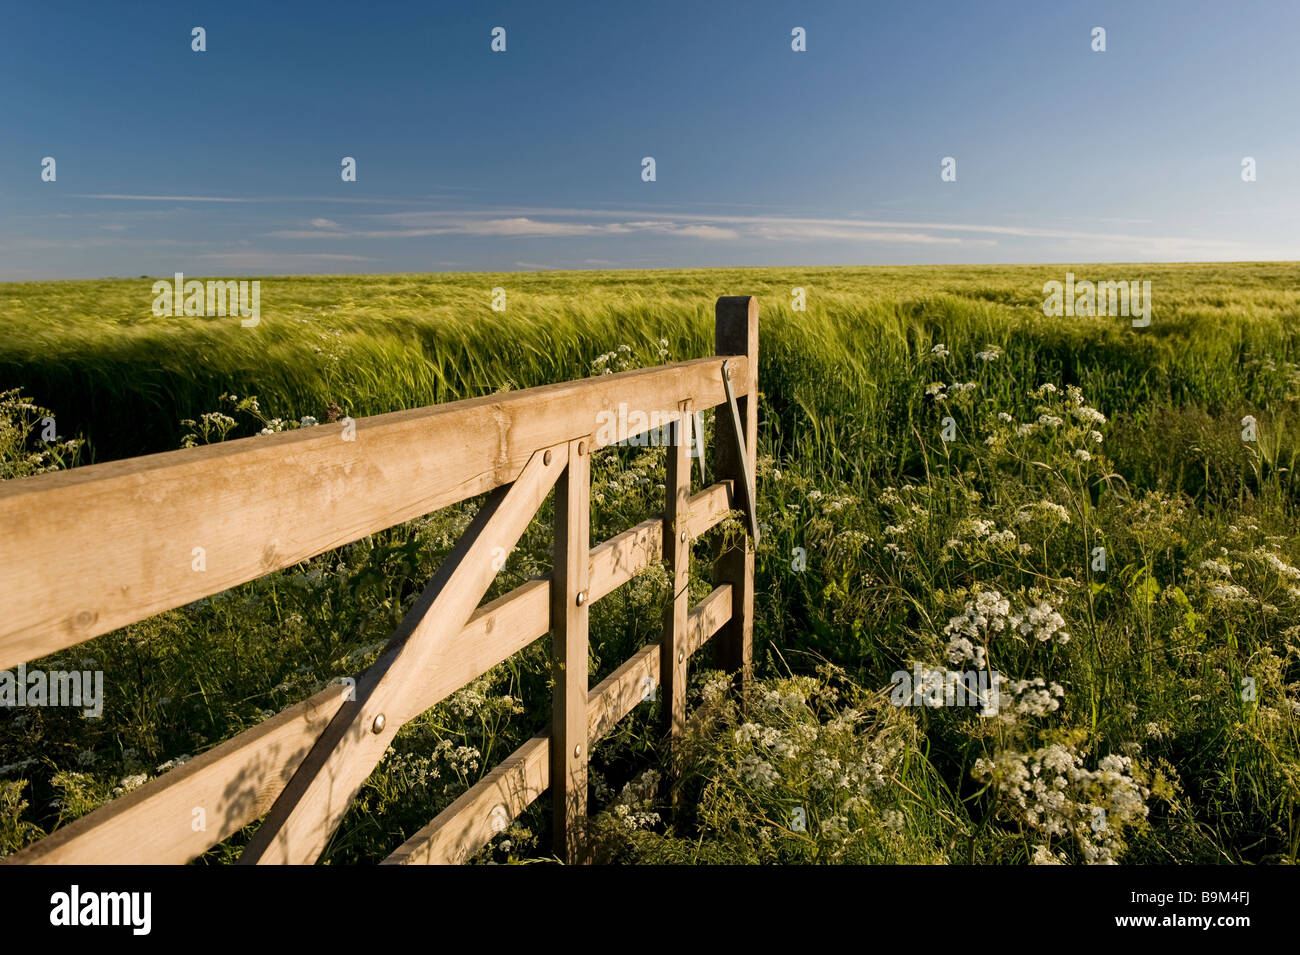 A wooden gate, open and leading into a field of wafting, unripened crops. Stock Photo